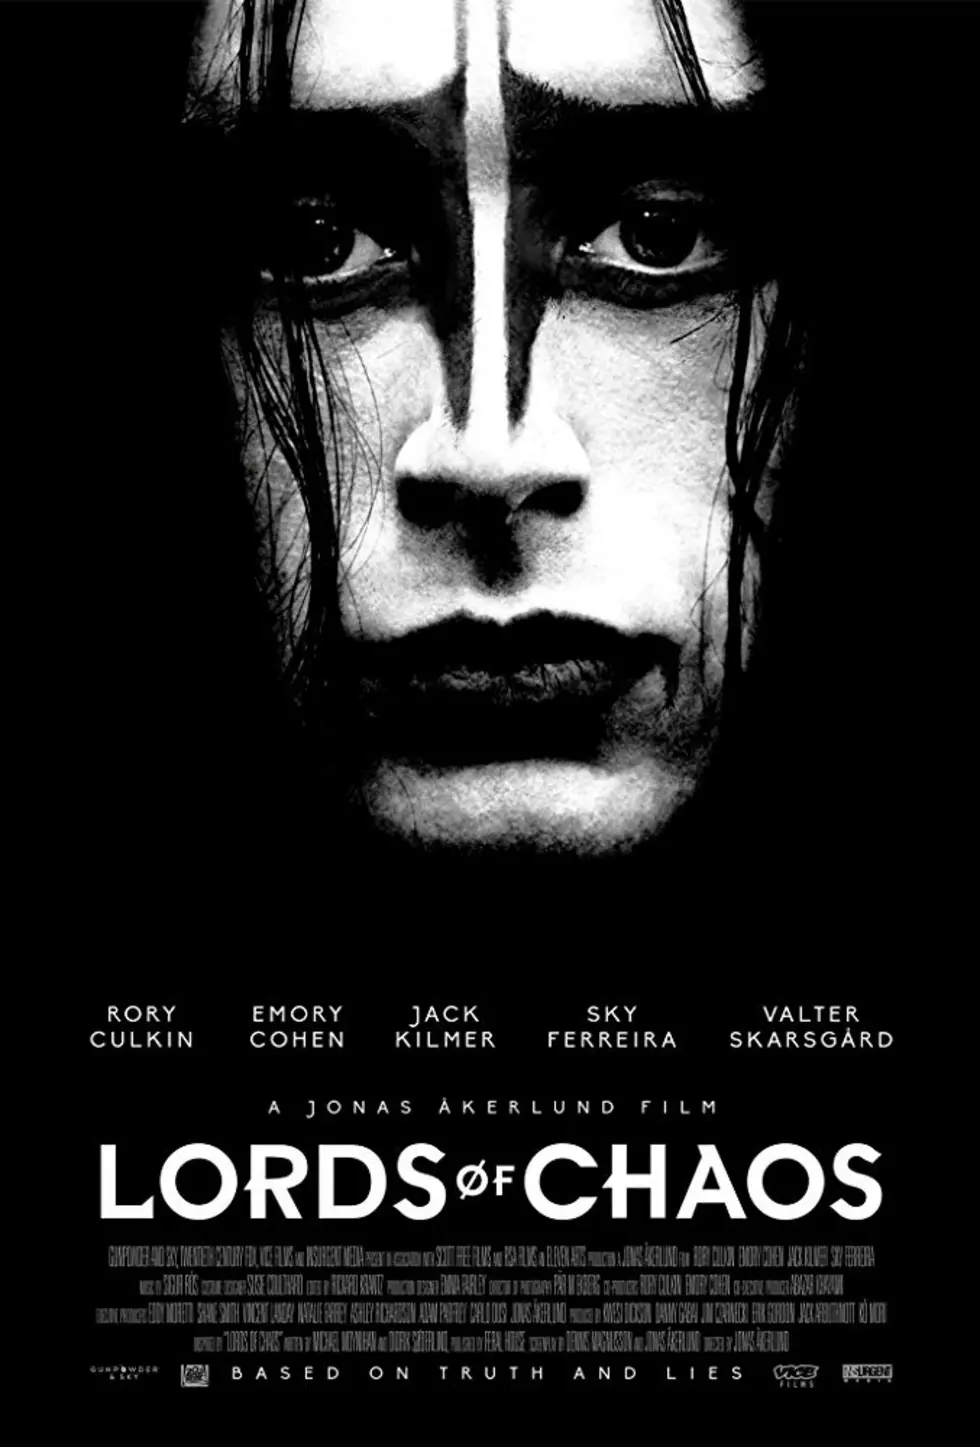 Alamo Drafthouse to Host Week Long Run of ‘Lords of Chaos’ Based On the Real Story of Mayhem